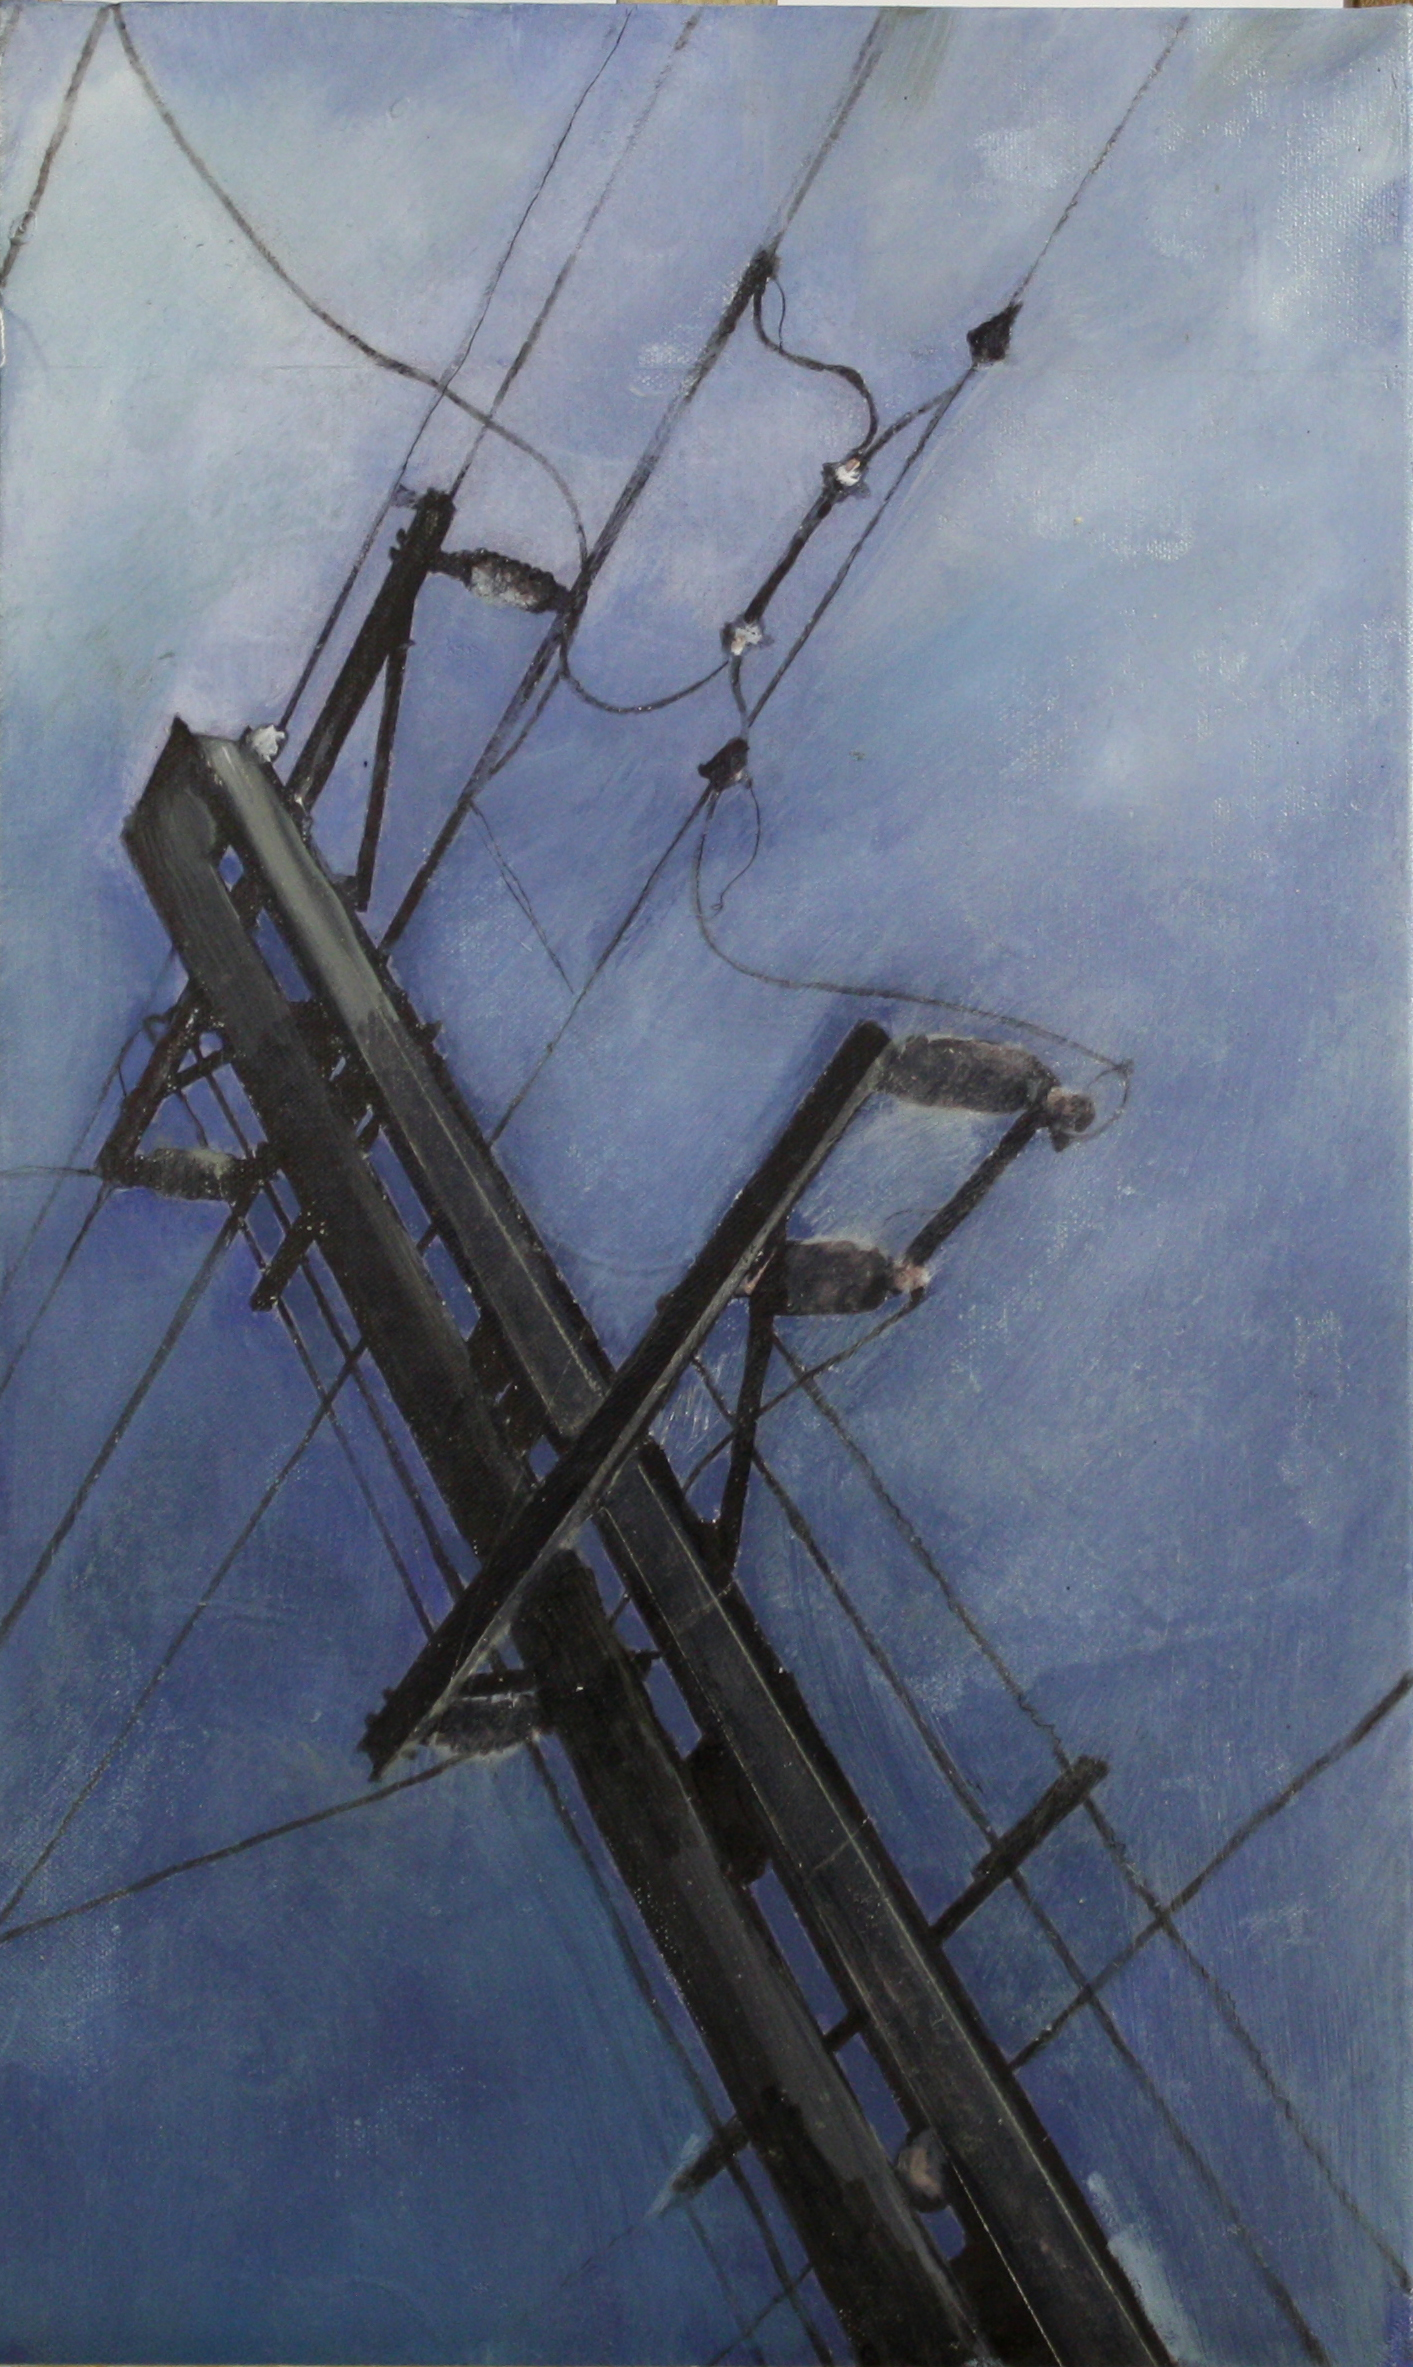  Looking Up:  Steel pole,   2011,oil on canvas on hardboard  50 x 76 cm  private collection       